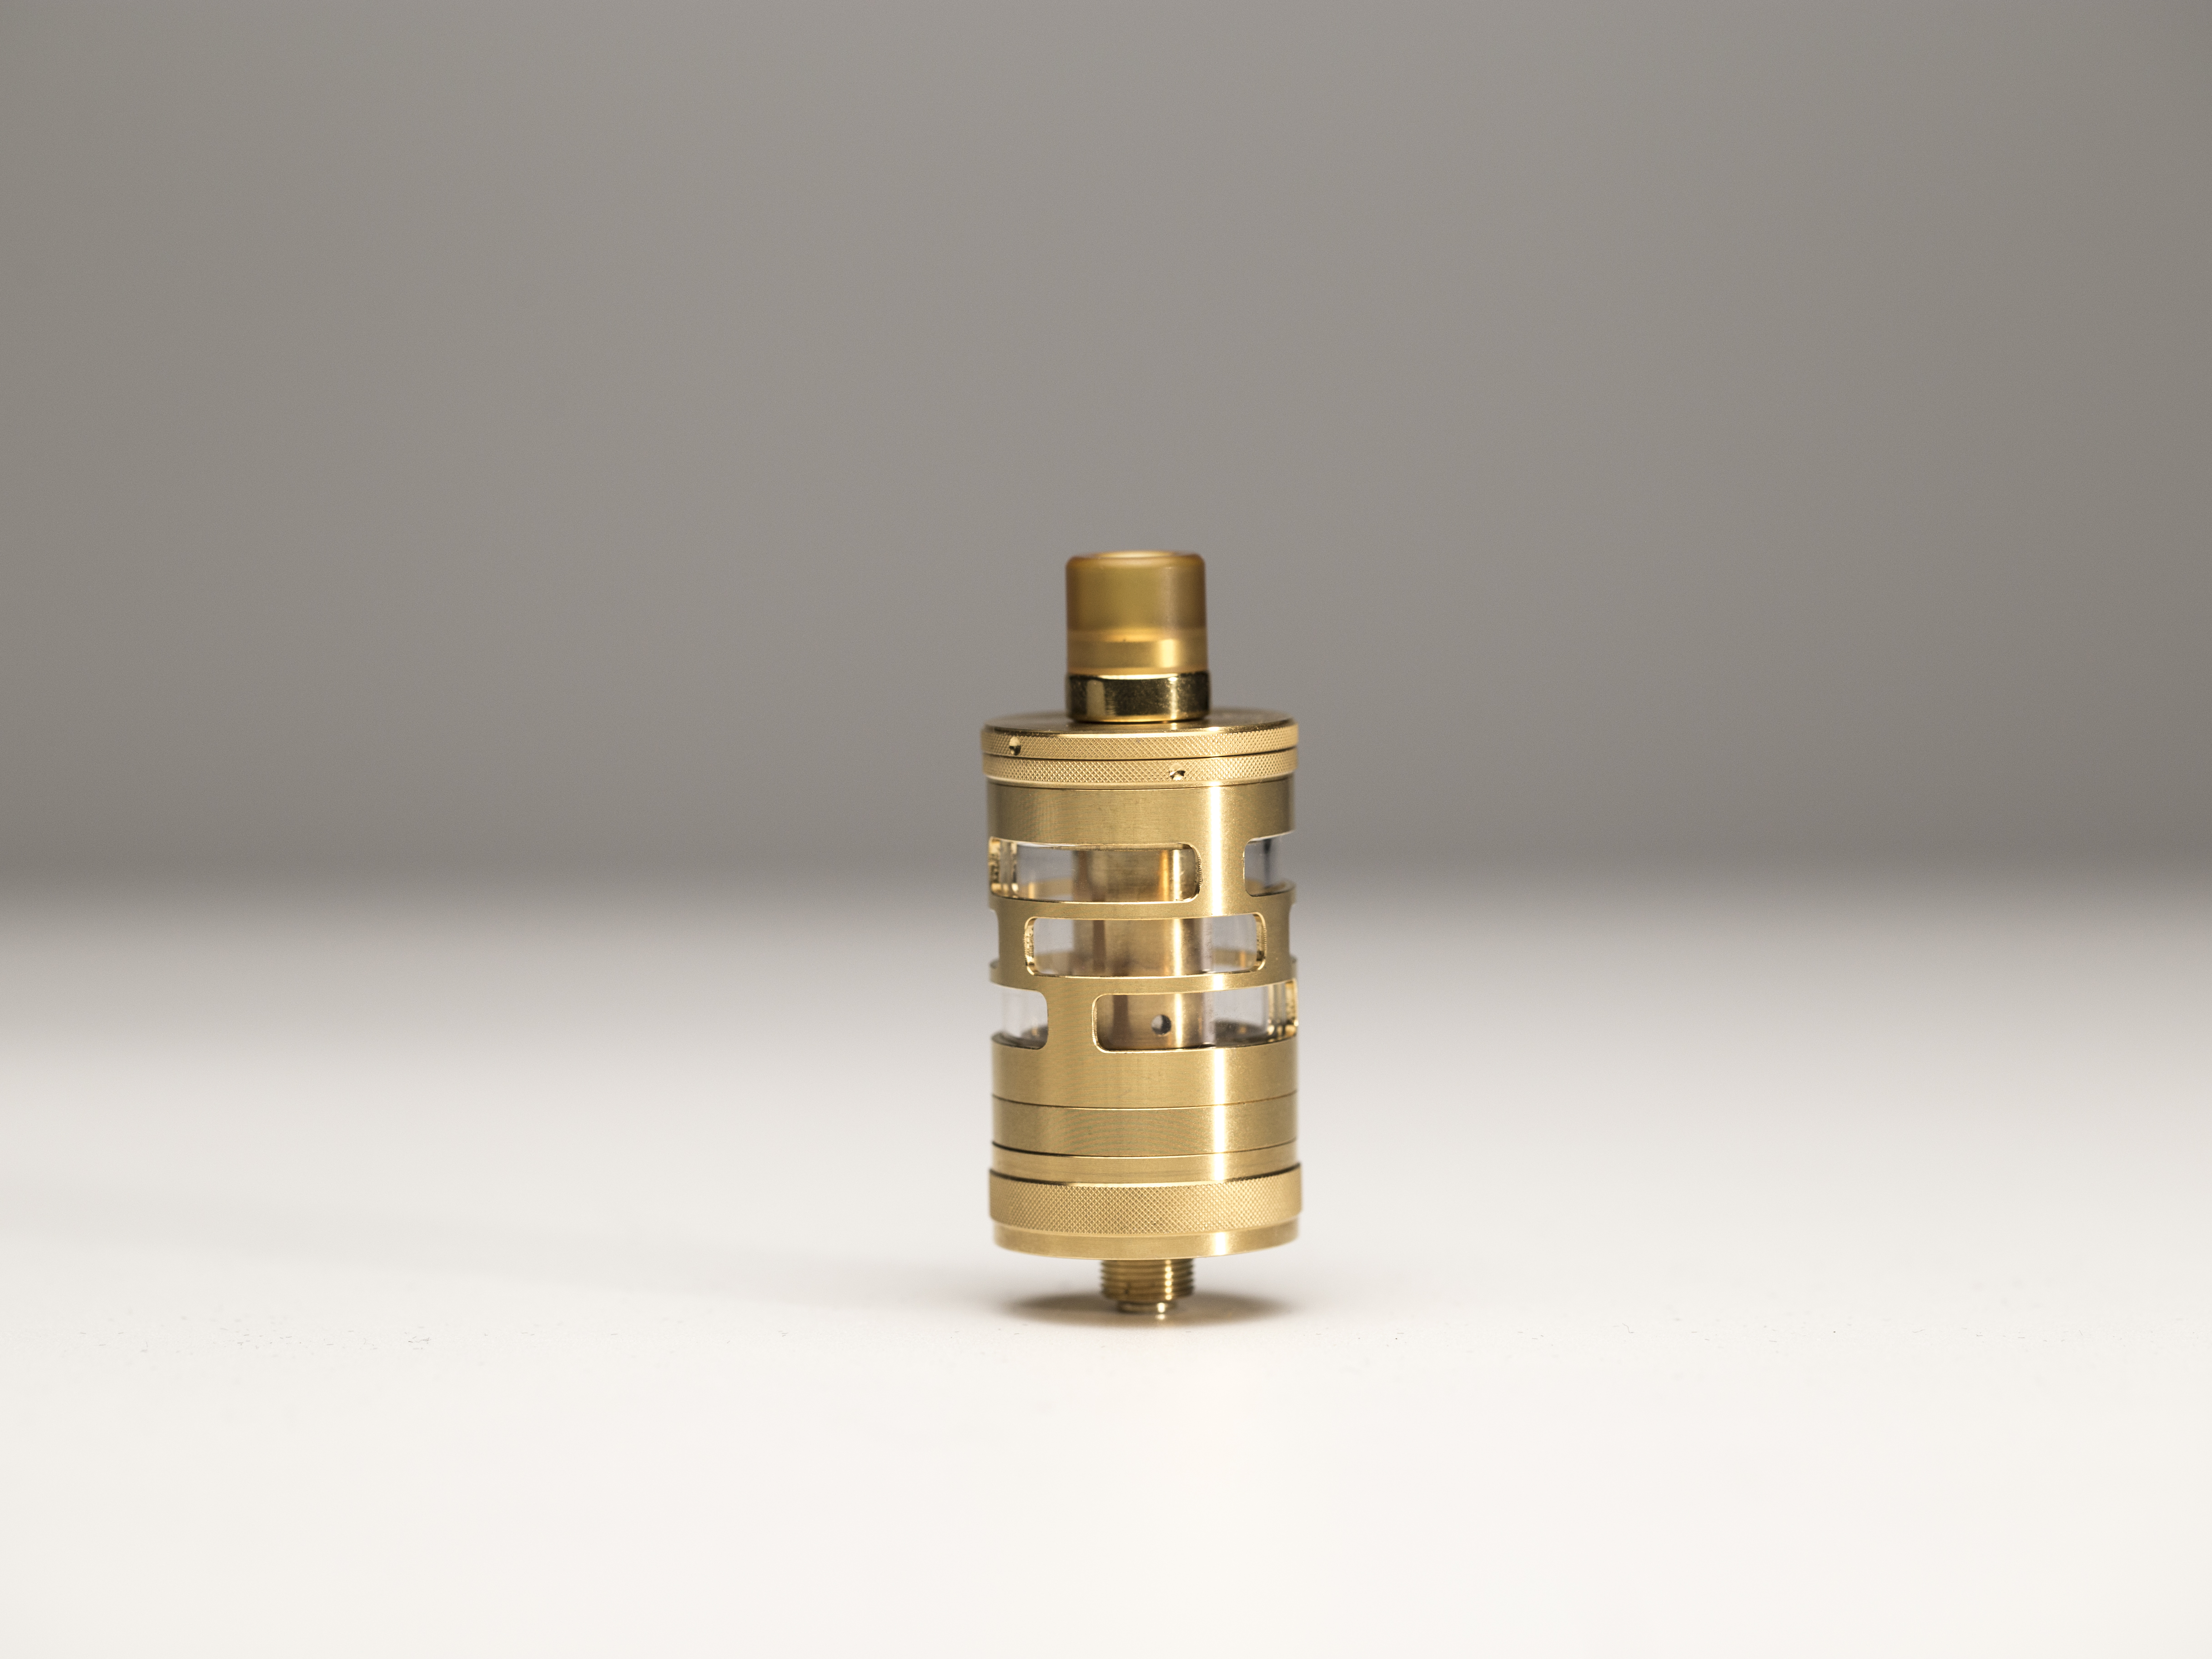 The gold color version of the Aspire GT tank with its protective metal sleeve. 